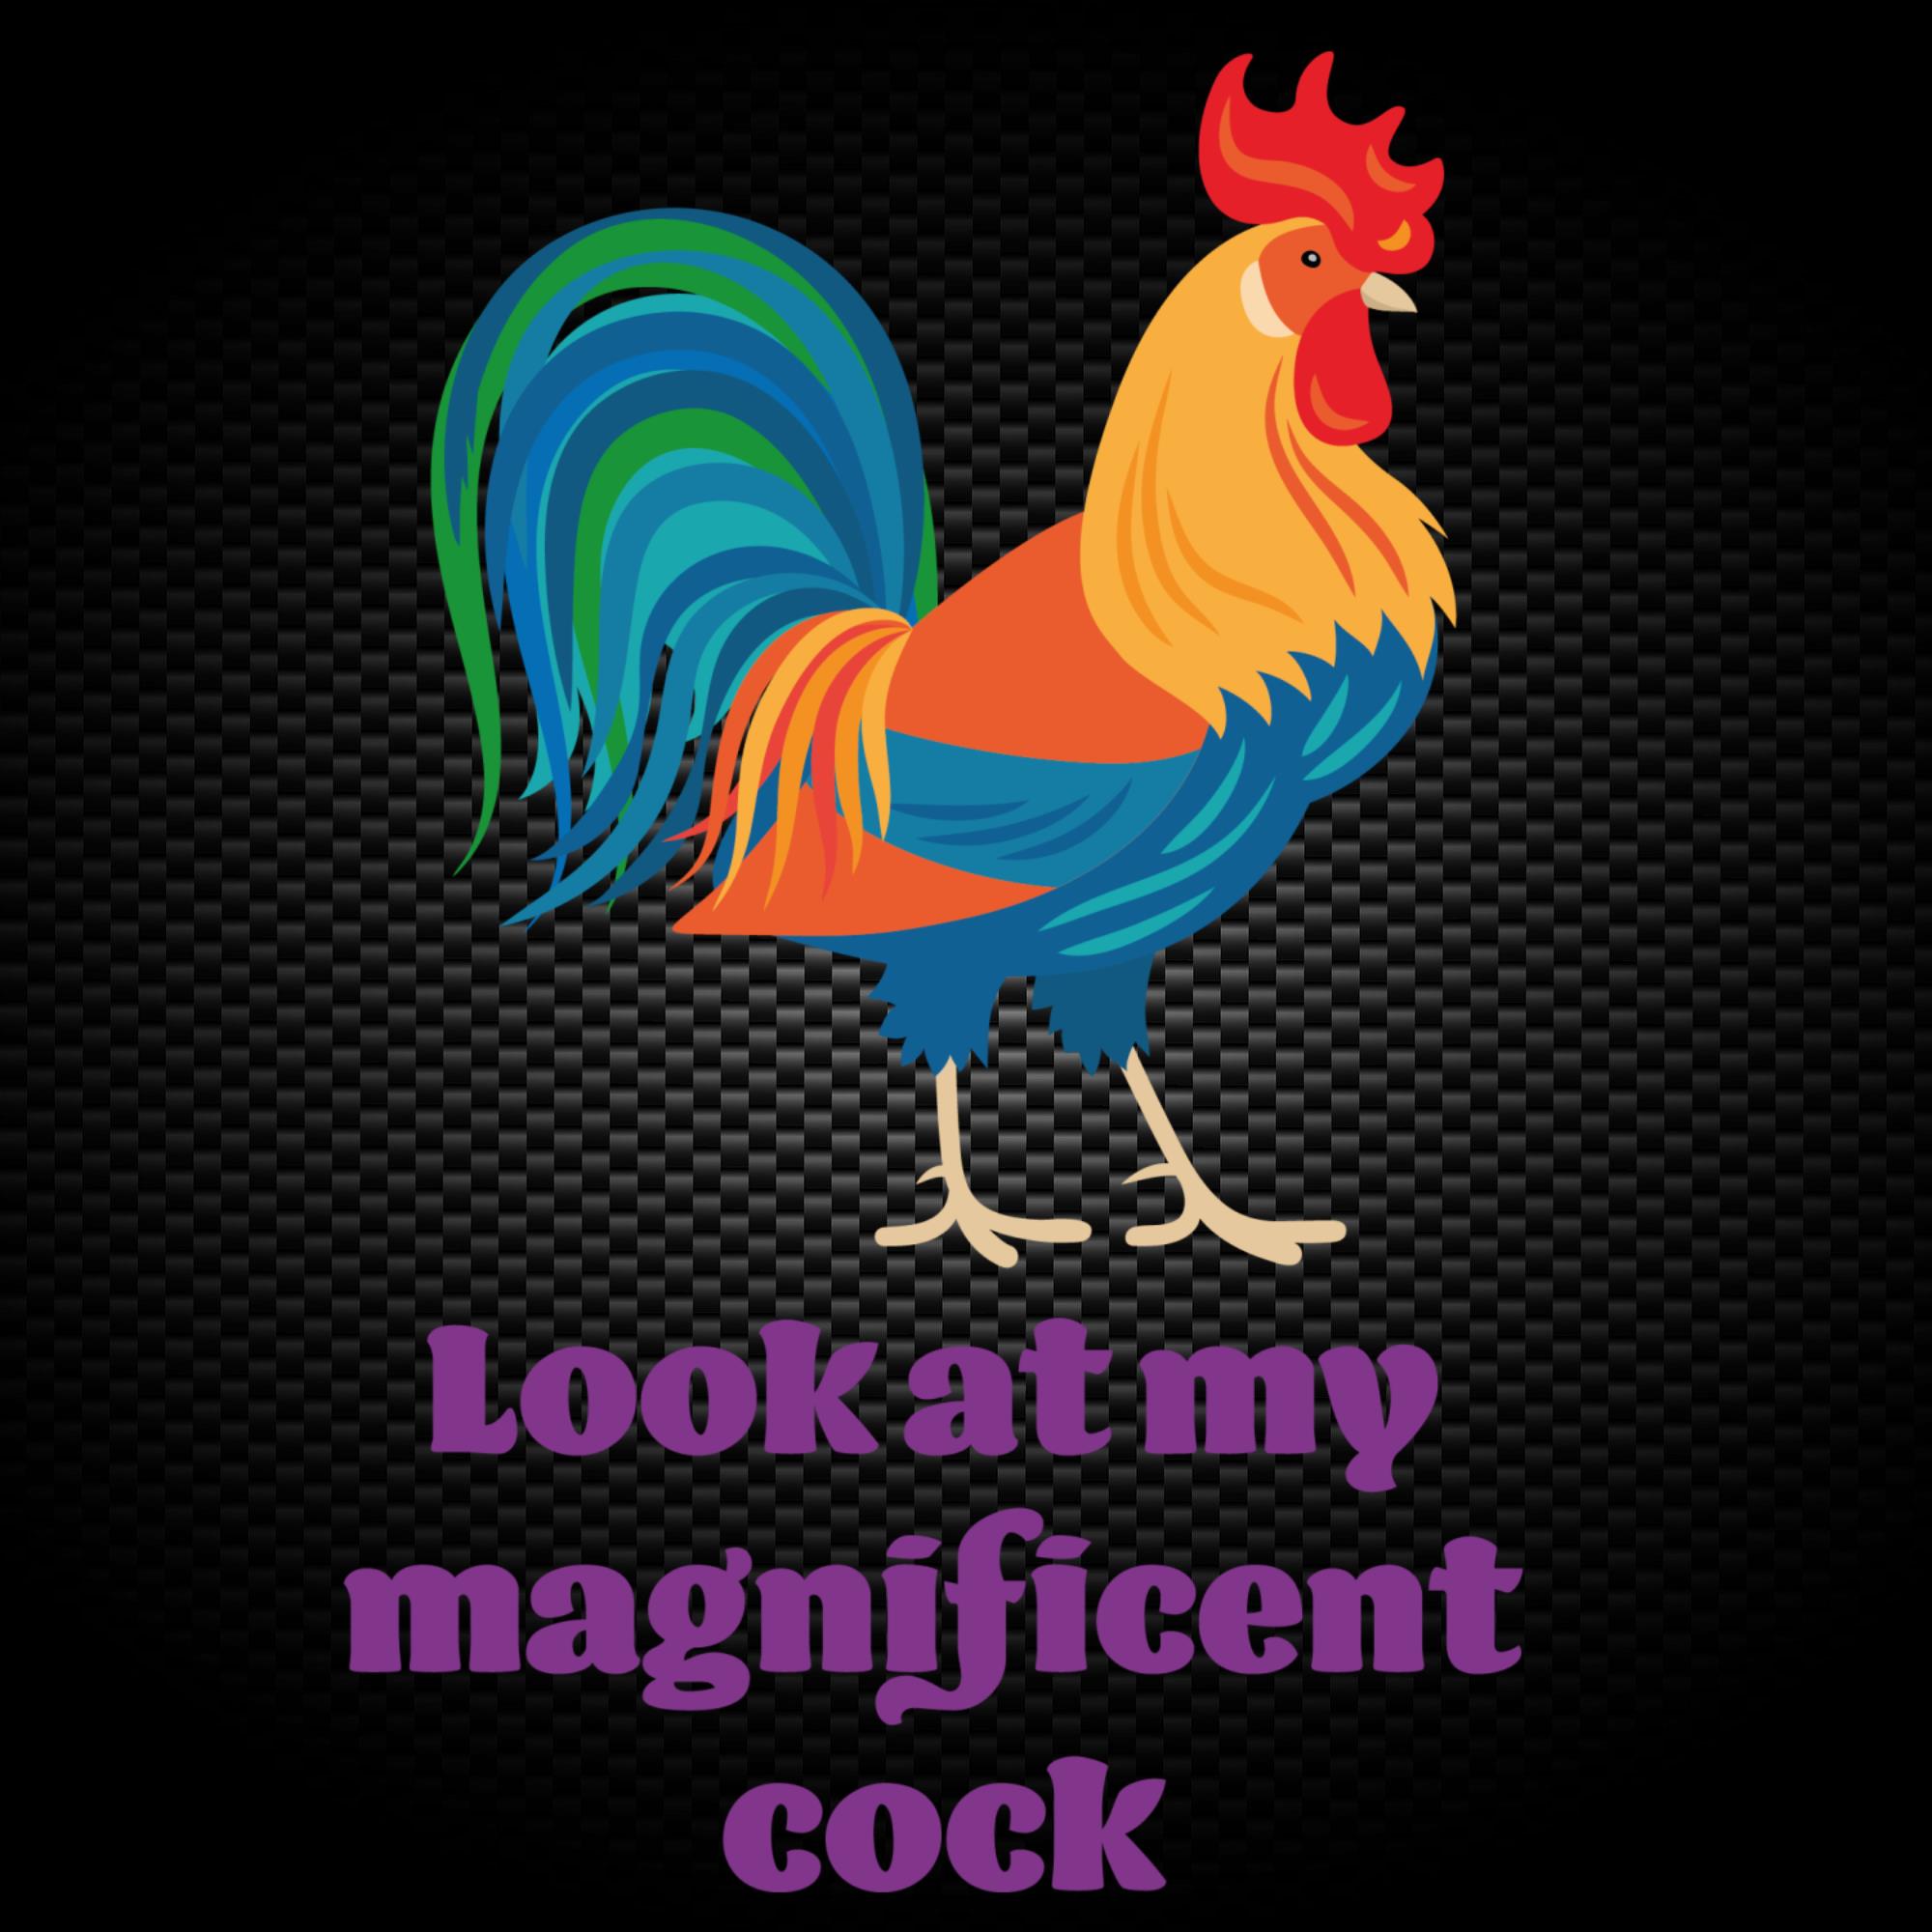 Look at my magnificent cock